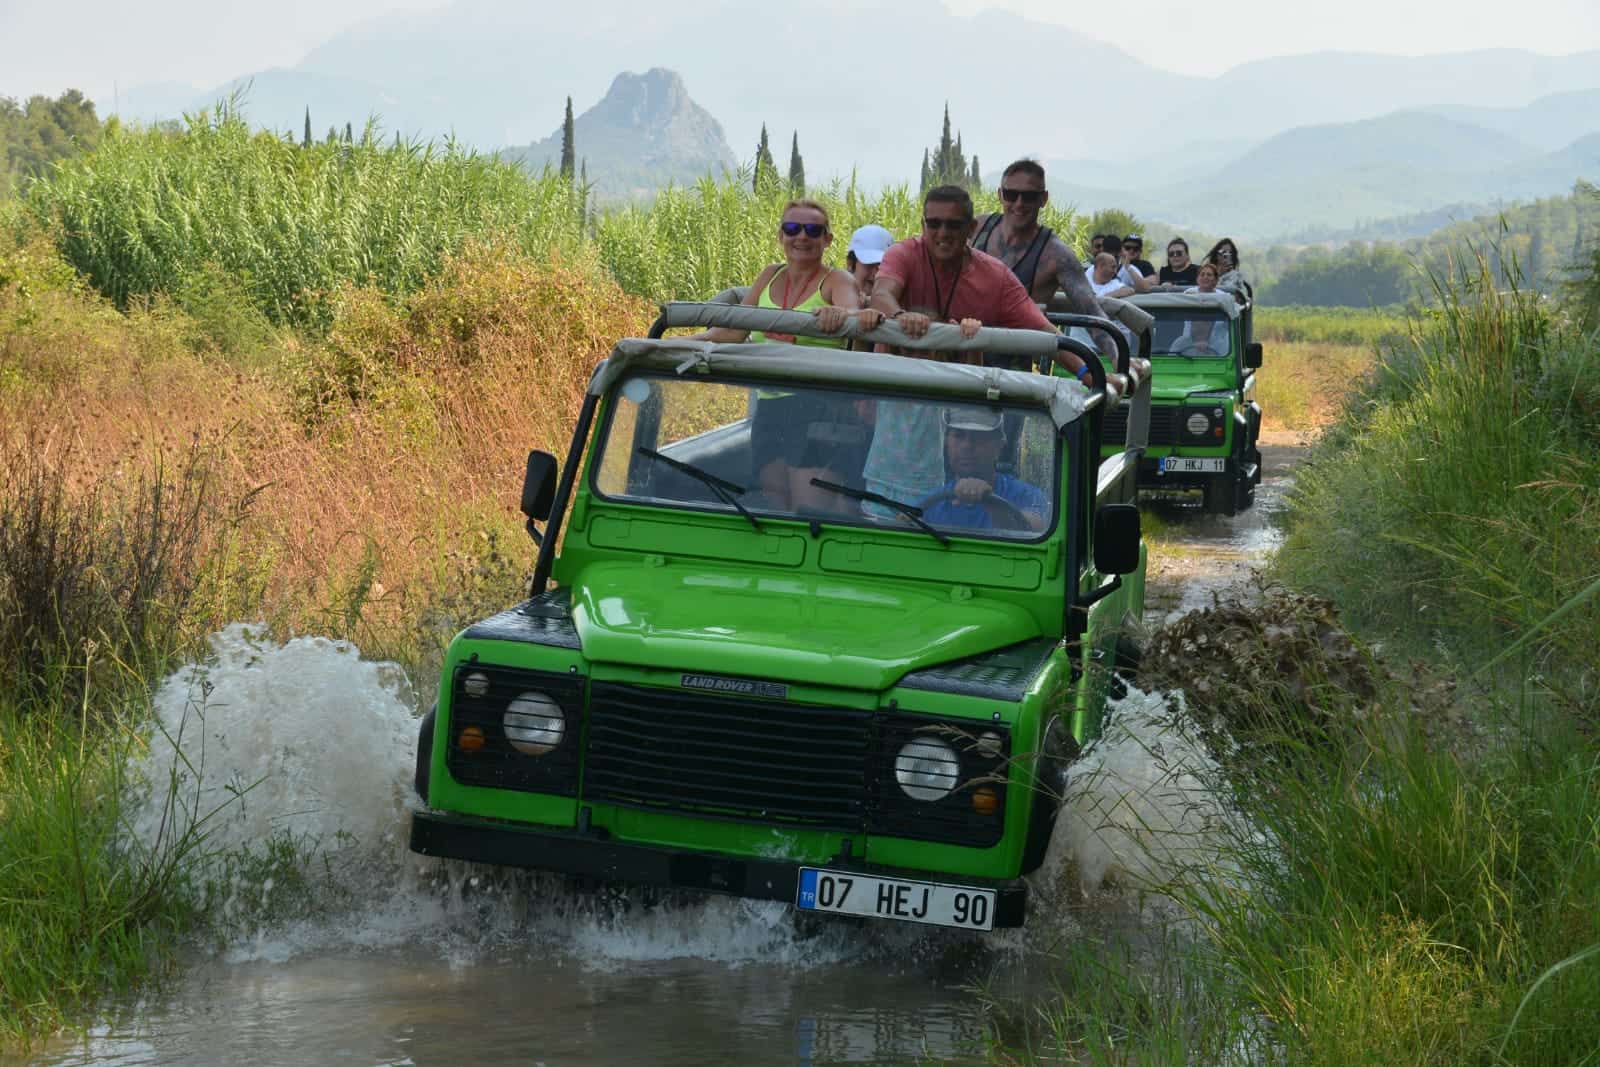 Canyon Tazi In 4x4 Combiend With Rafting (Daily Tour)